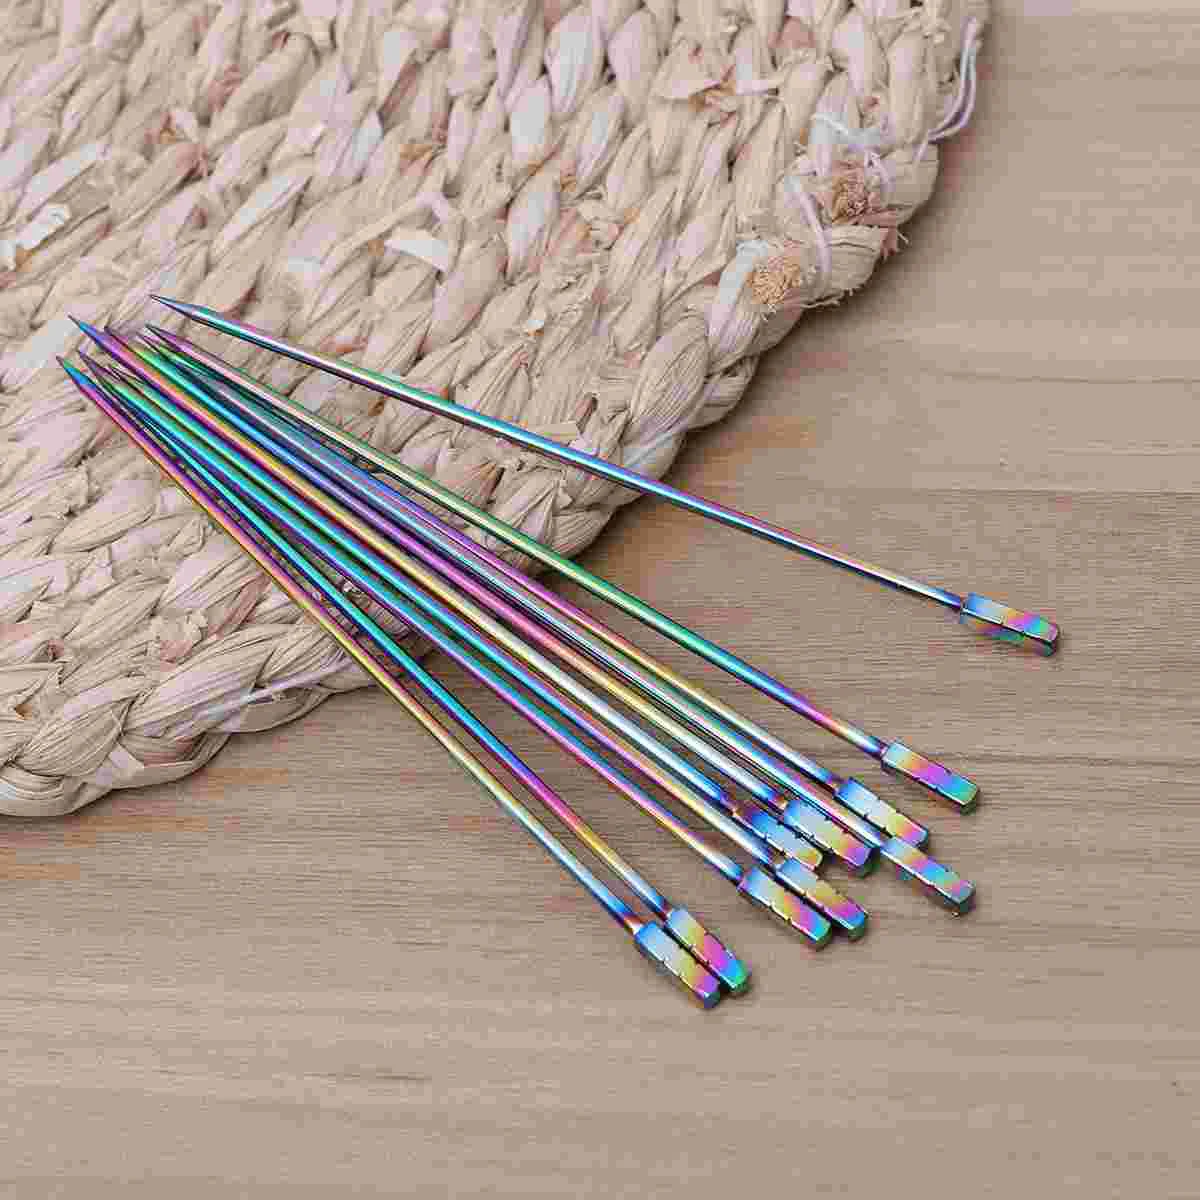 

10pcs Stainless Steel Cocktail Picks Fruit Sticks Toothpicks Appetizer Pick for Party Bar (Square Head)